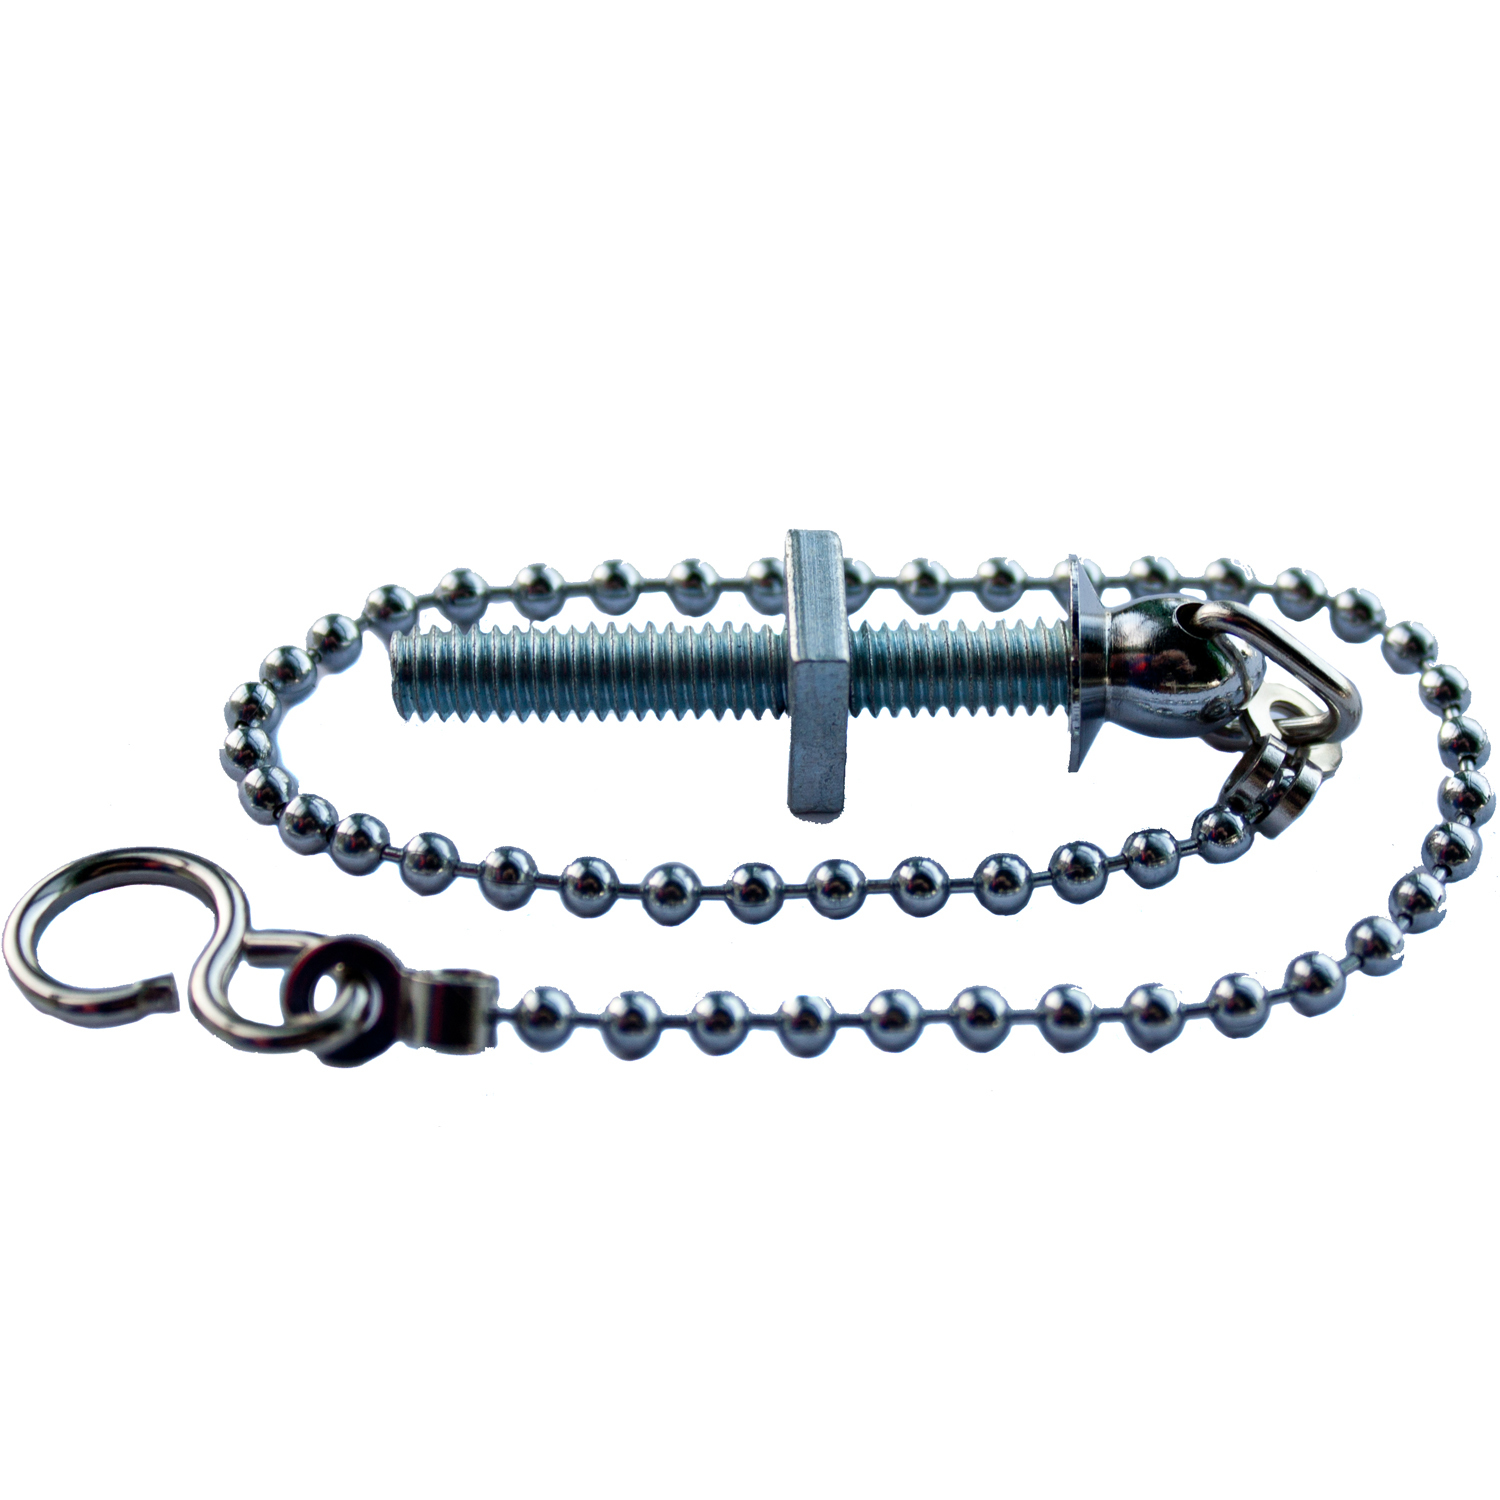 Oracstar 12 inch Sink Chain with Stay Image